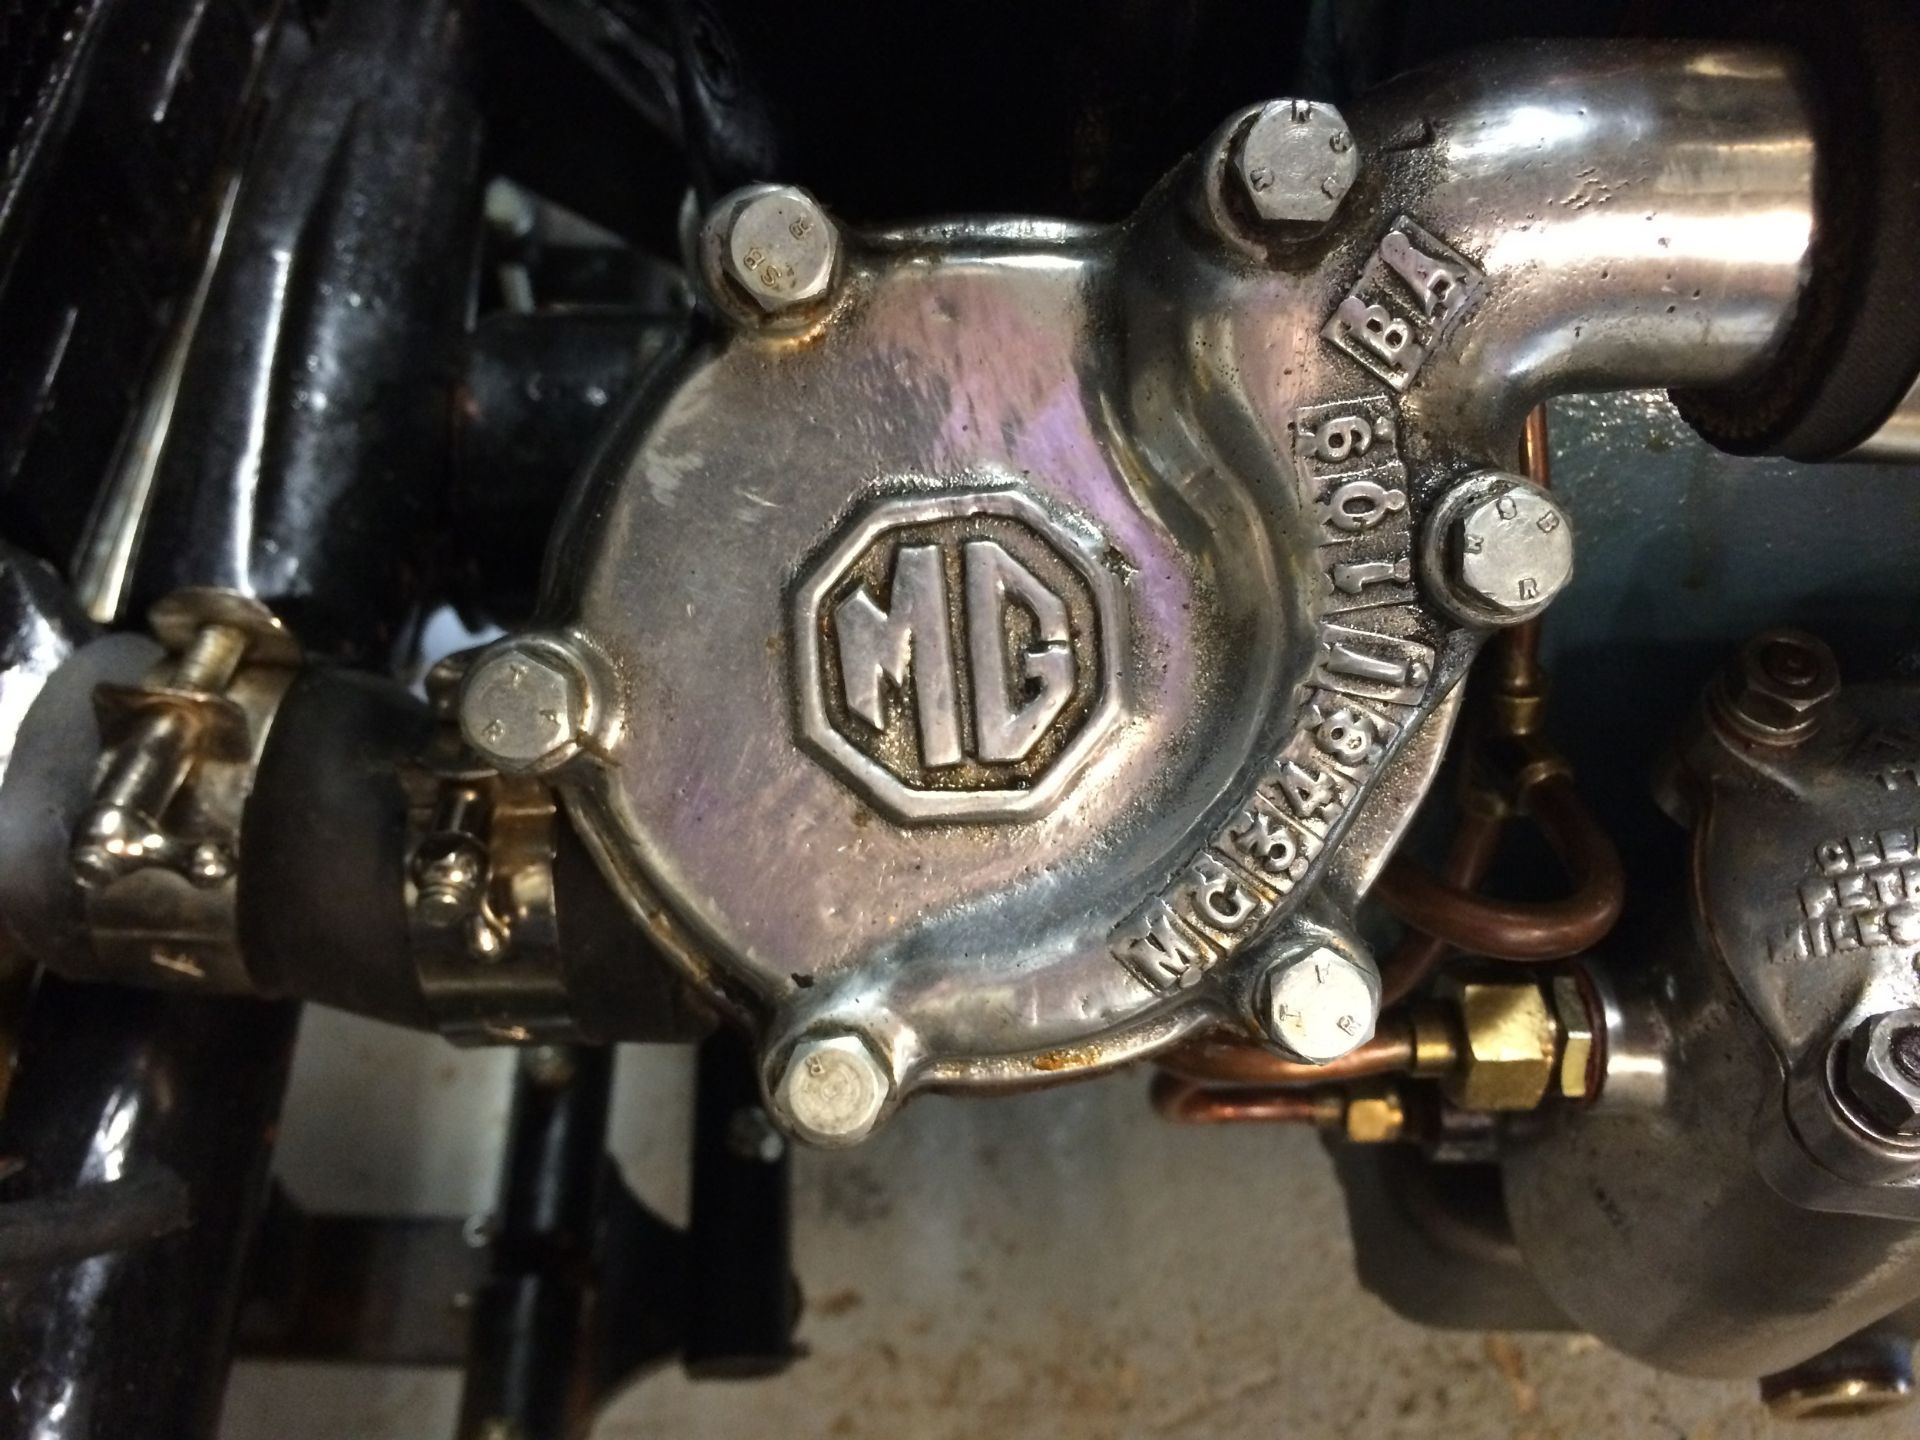 MG Q-TYPE RECREATION Registration Number: MG 5640 Chassis Number: F1221 Recorded Mileage: TBA - - Image 8 of 11